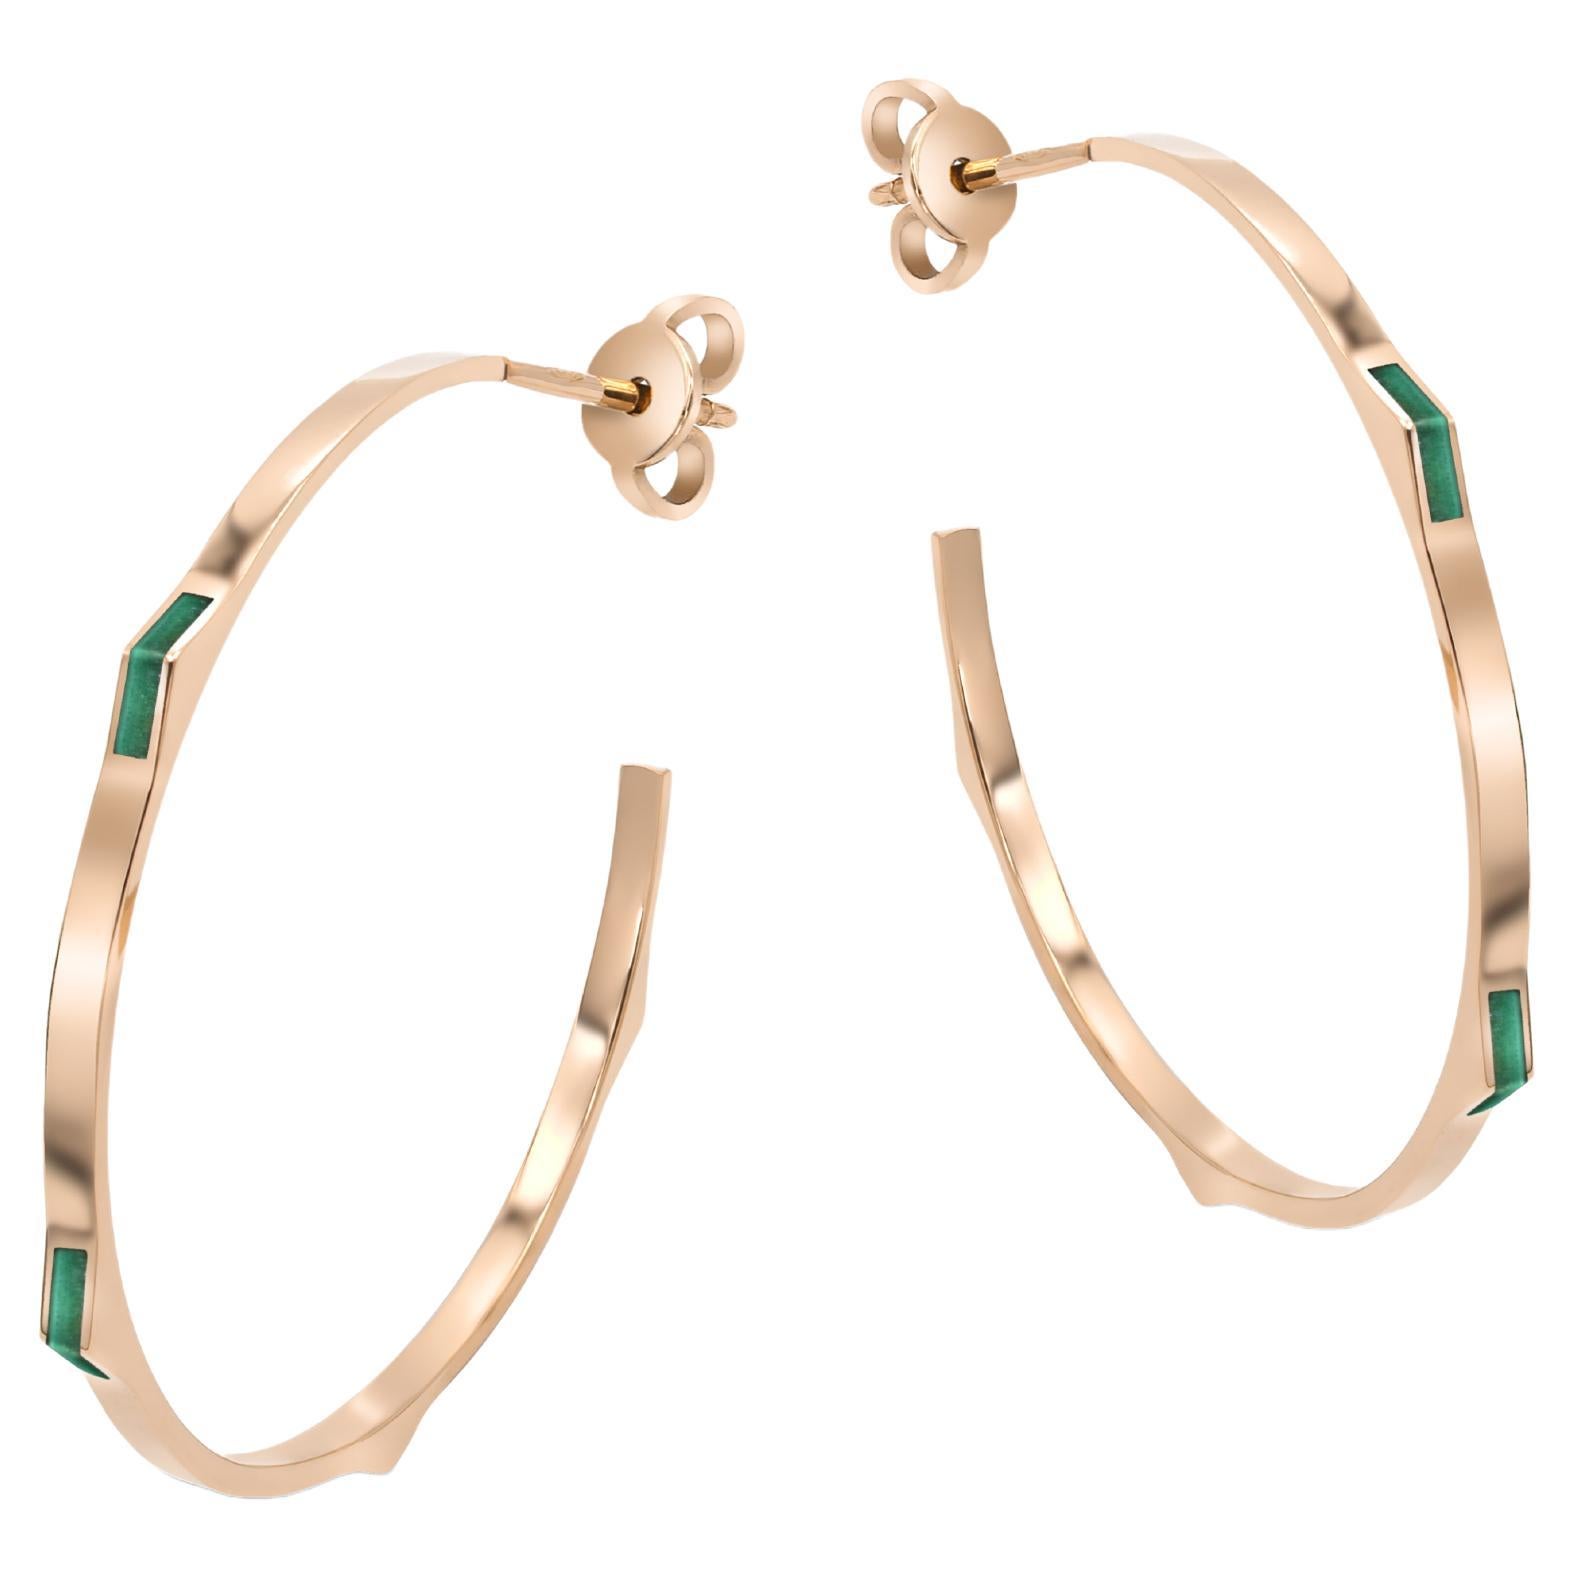 Earrings in rose gold and mother of pearl
Also availbale with malachite
Measures: 35mm/1.37in

EVE_R COLLECTION
The edgy and modern colors of turquoise, onyx and coral give life to Eve_r. The new collection is inspired by the iconic and